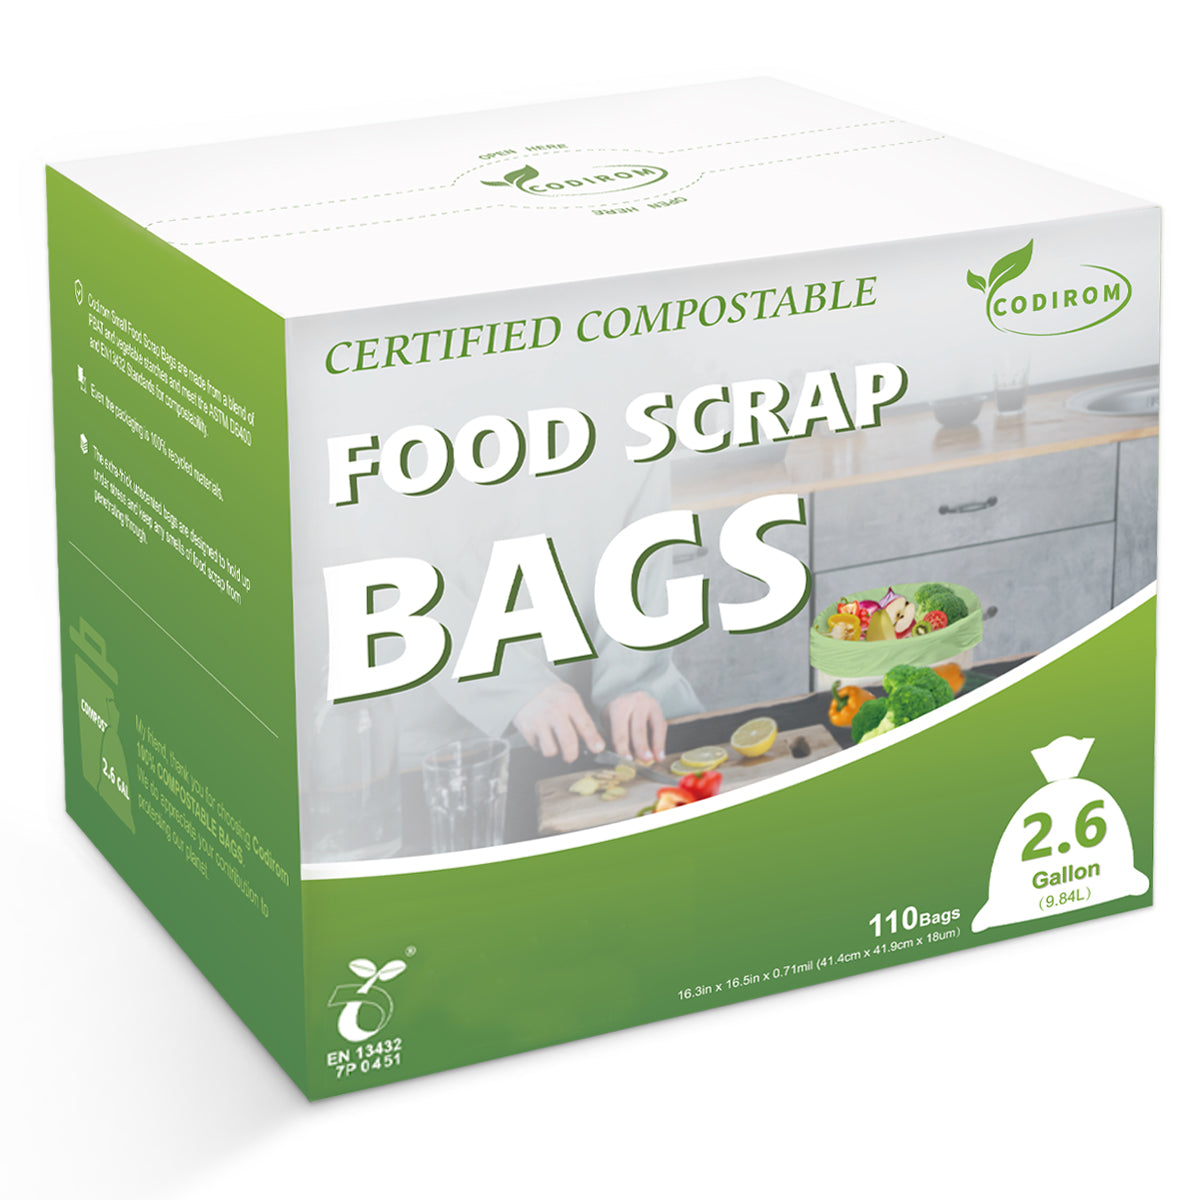 Codirom 100% Compostable Trash Bags, 2.6 Gallon, 9.84 Liter, 110 Count Kitchen Food Scrap Waste Bags for Countertop Bin with Europe EN13432 Certified